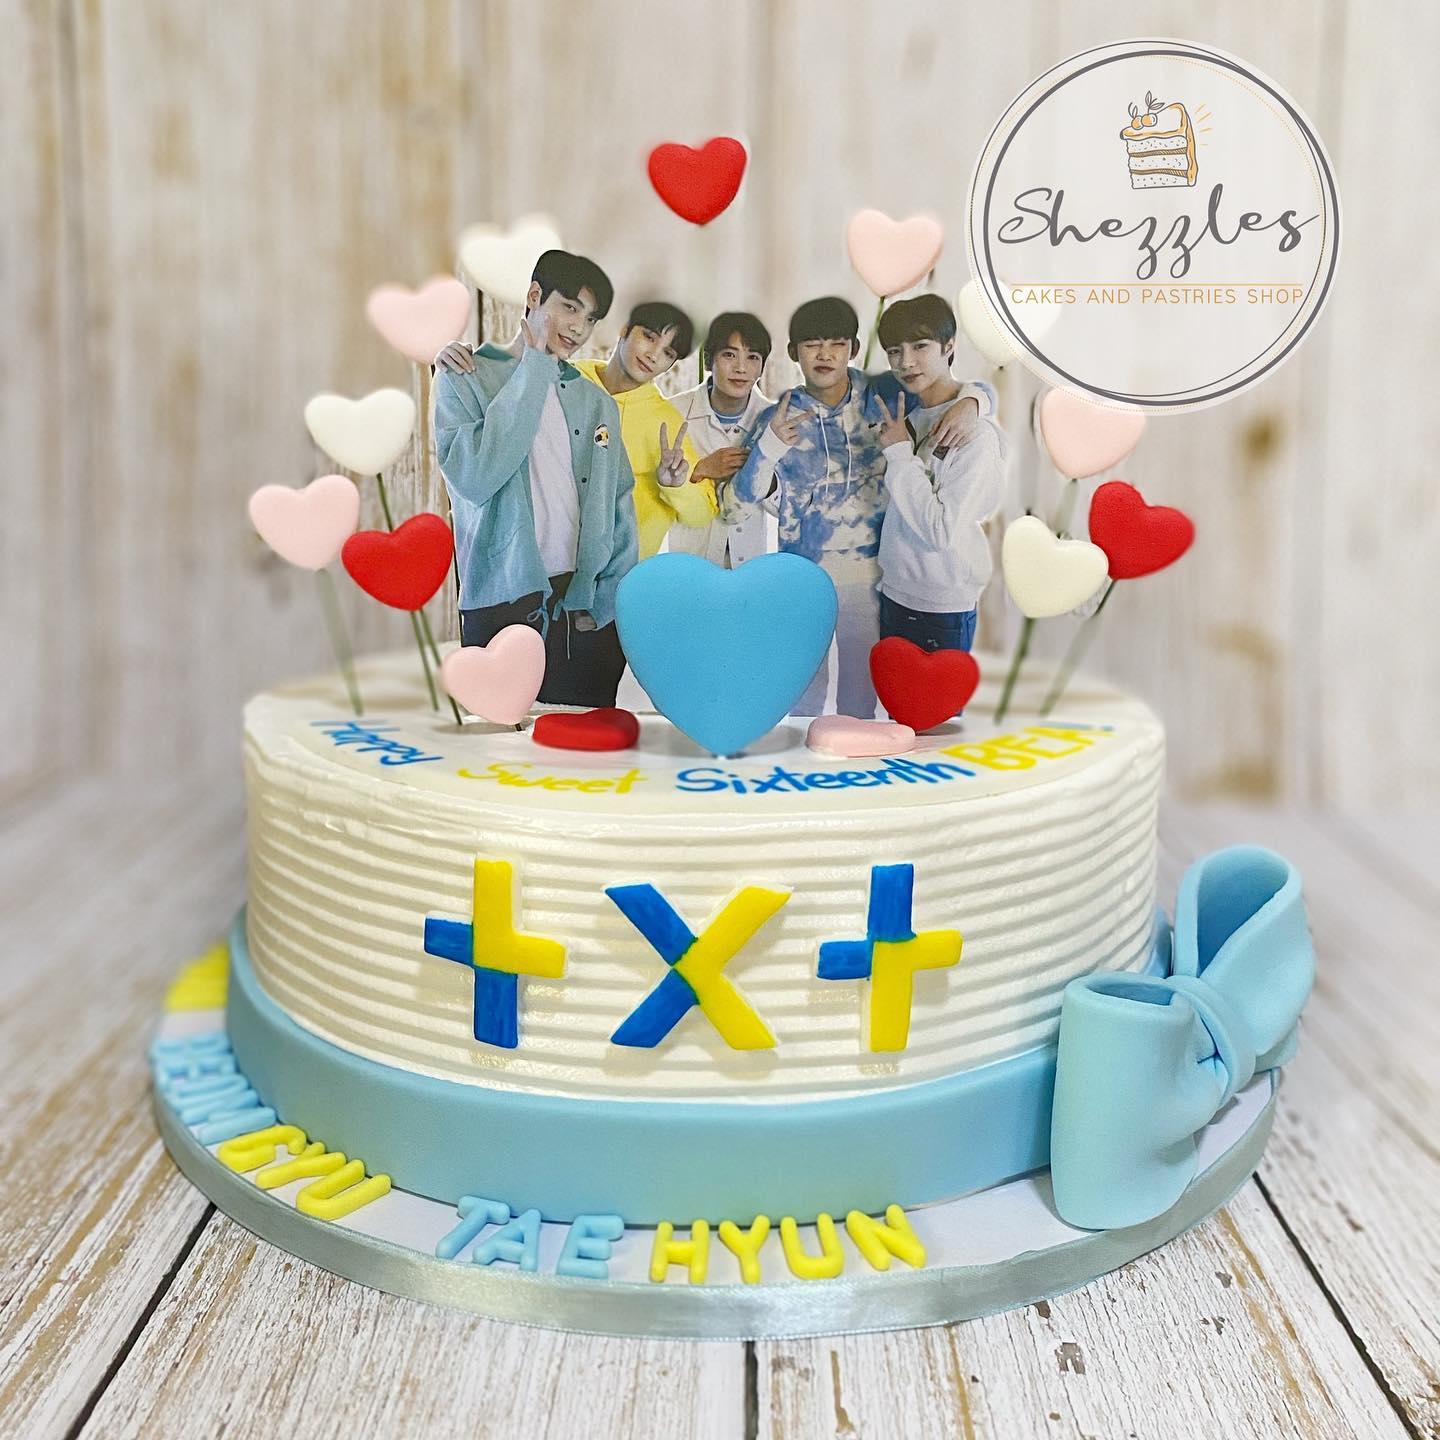 SHEZZLES Cakes and Pastries TXT KPop Cake